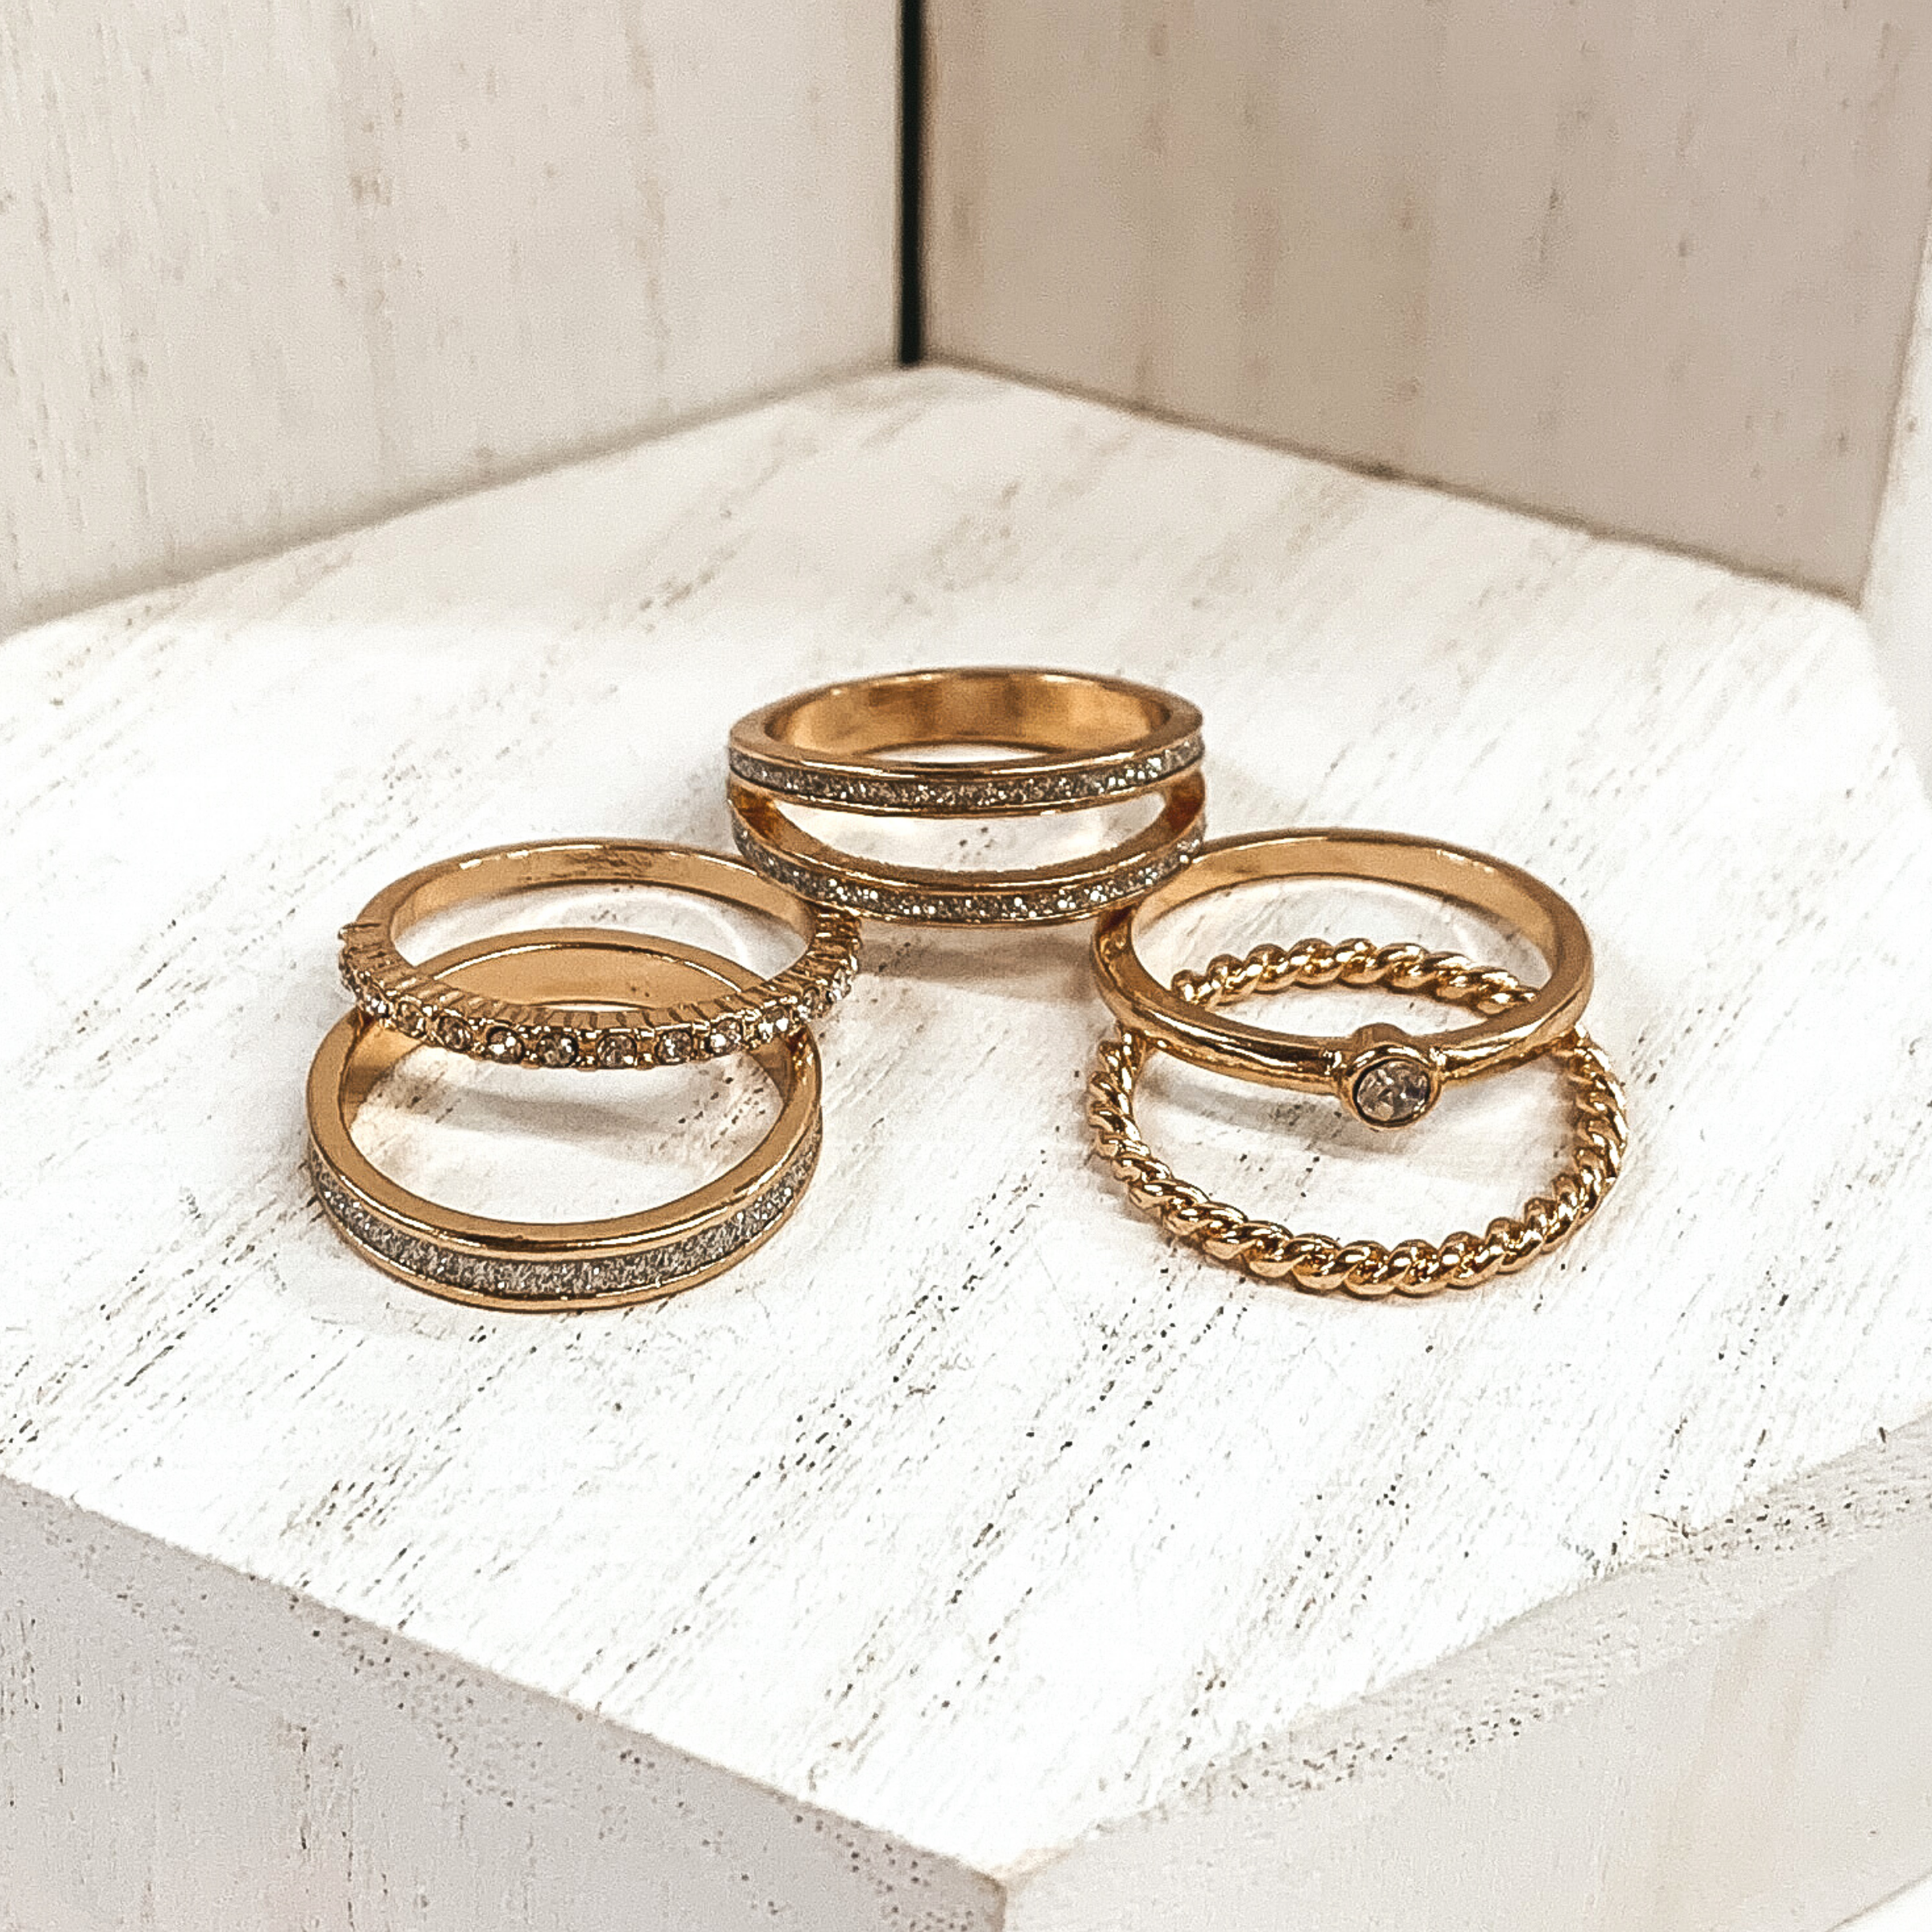 This is a set of five gold rings. All of them but one ring has crystals in different varieties on them. The single ring that does not have crystals is a twisted ring. These rings are pictured on a white background.